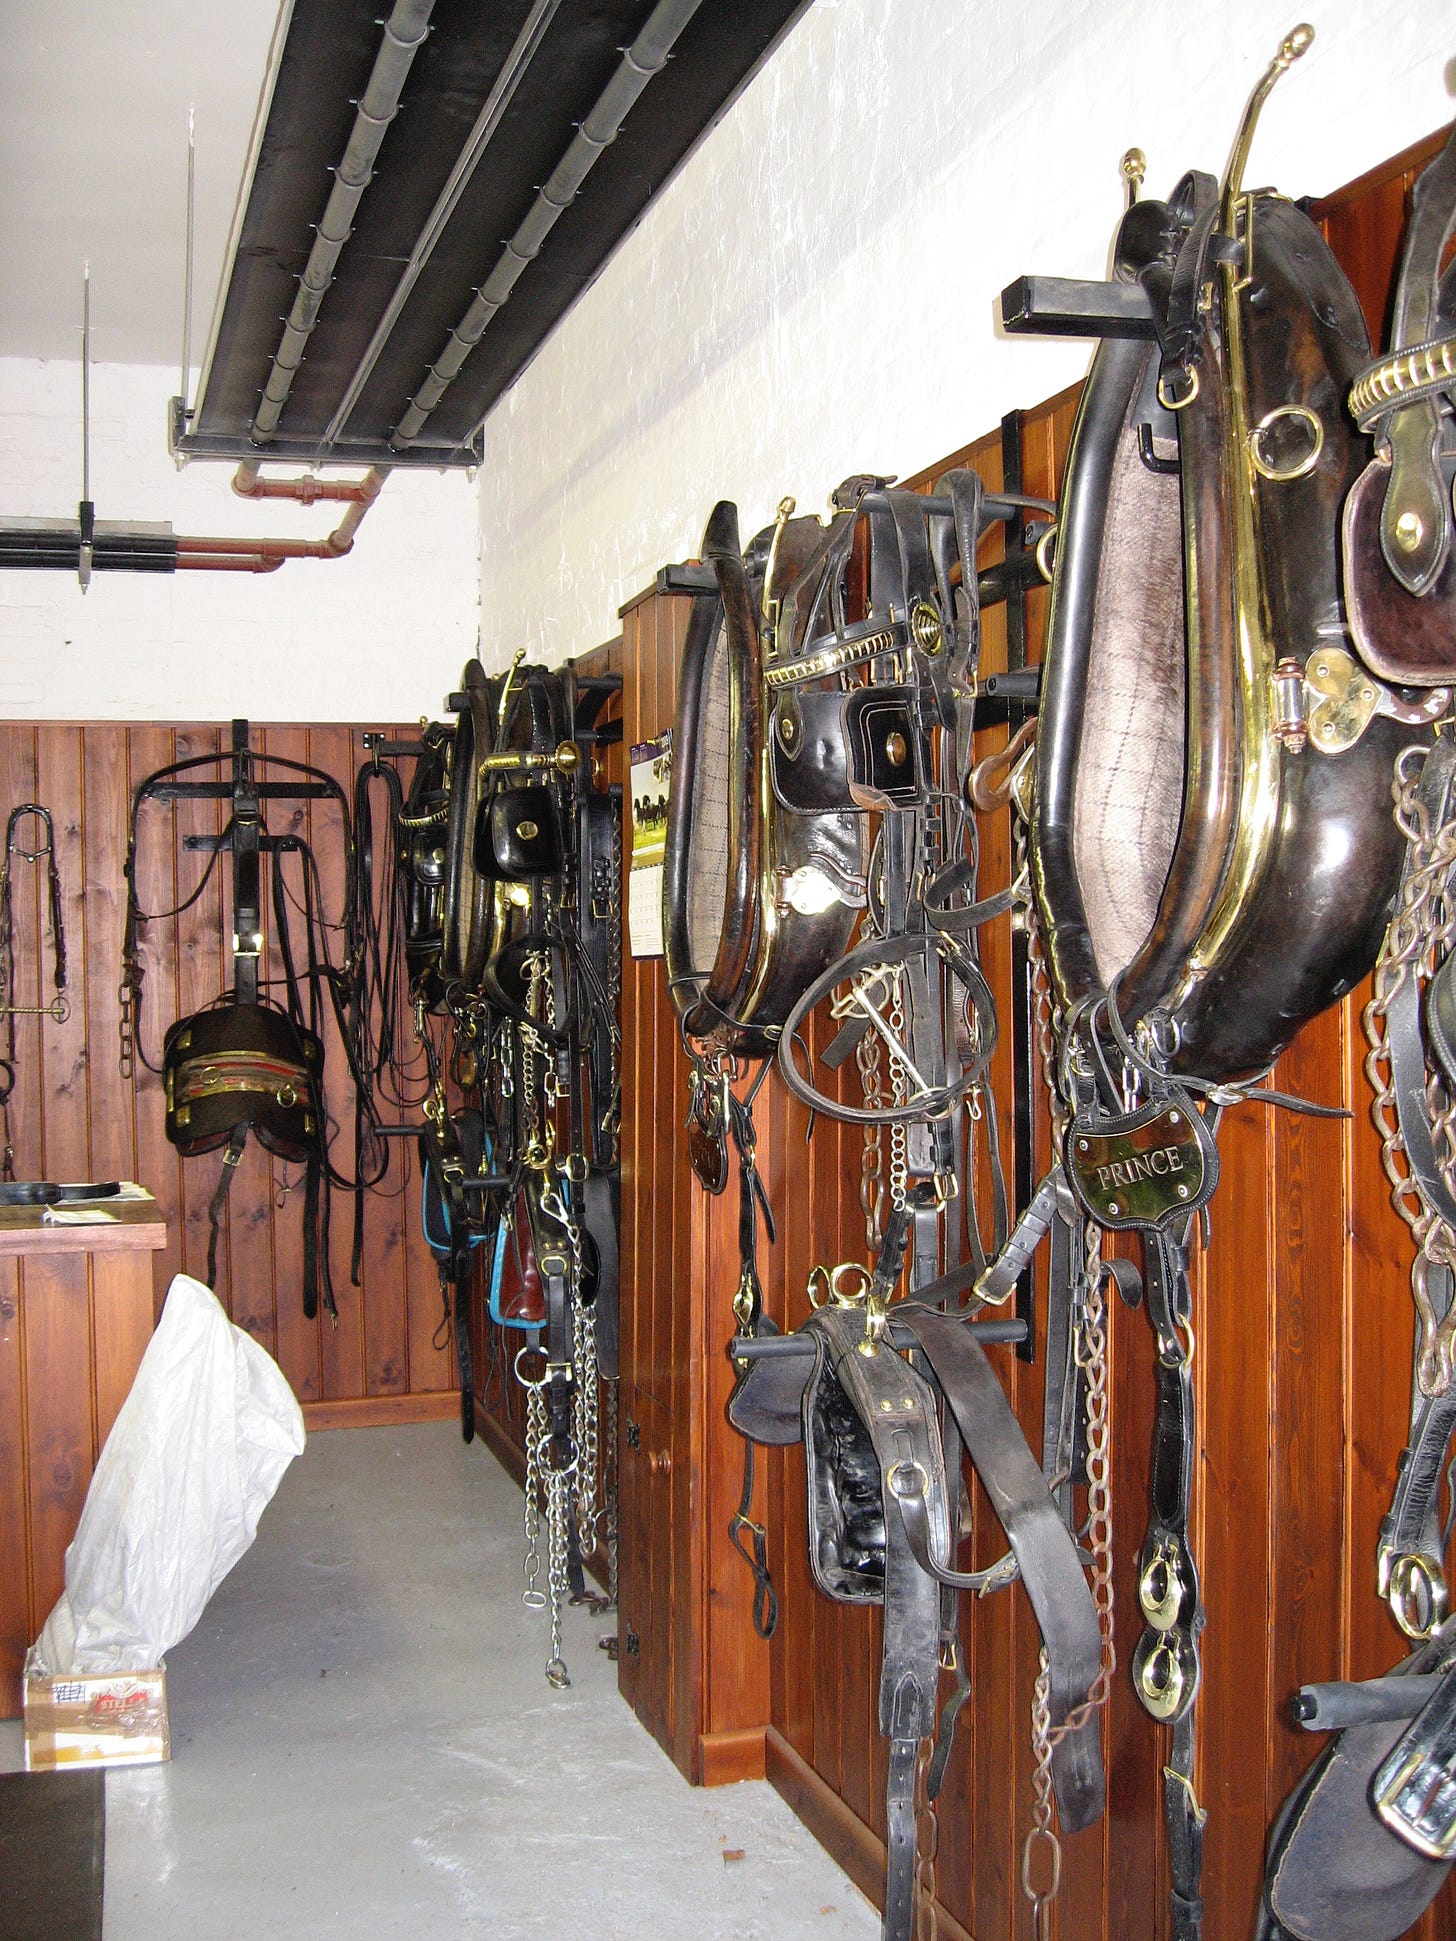 The Tack room Wadworth Brewery Shire horses